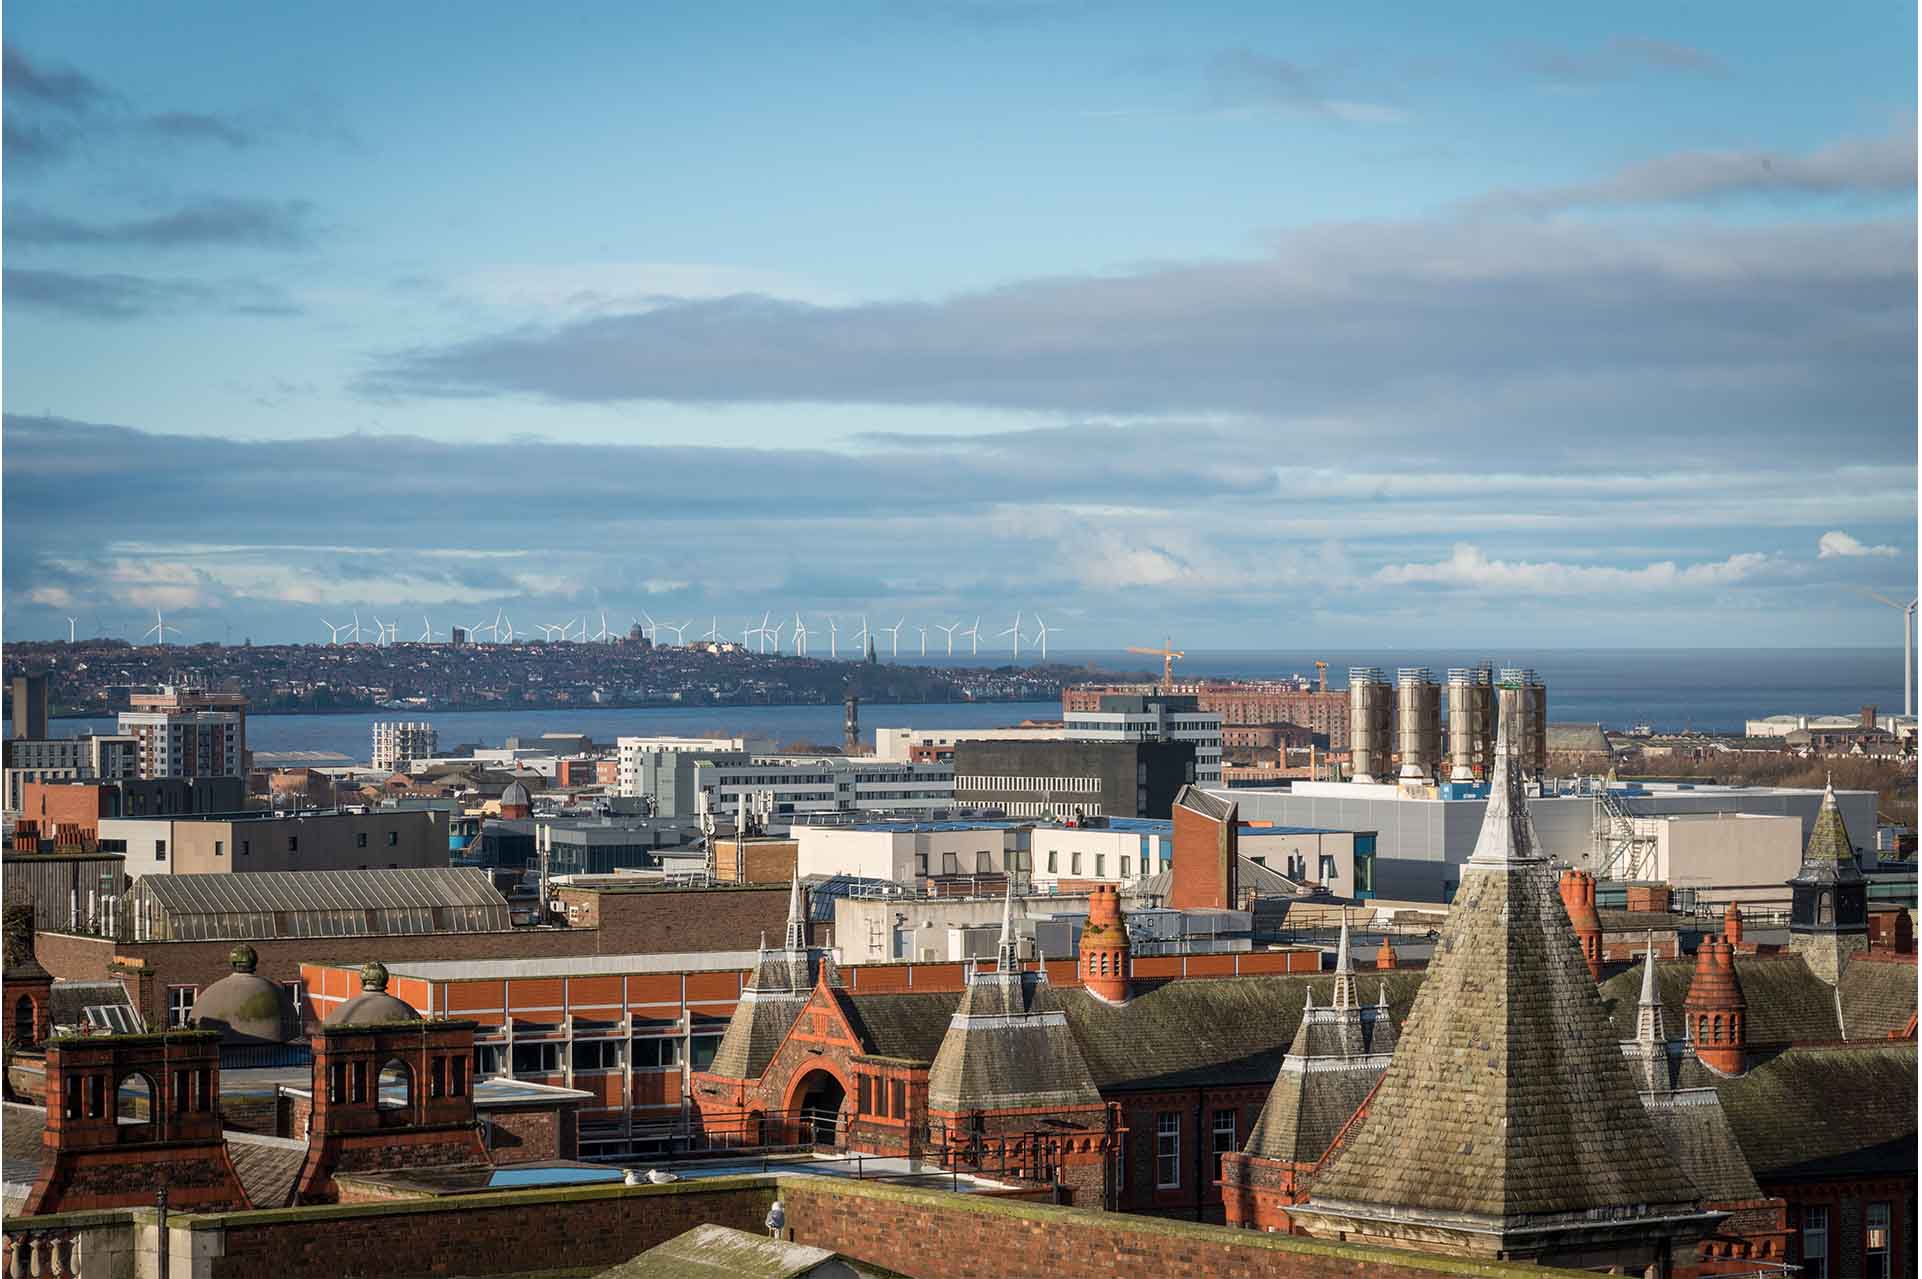 Image of campus and Liverpool skyline from above